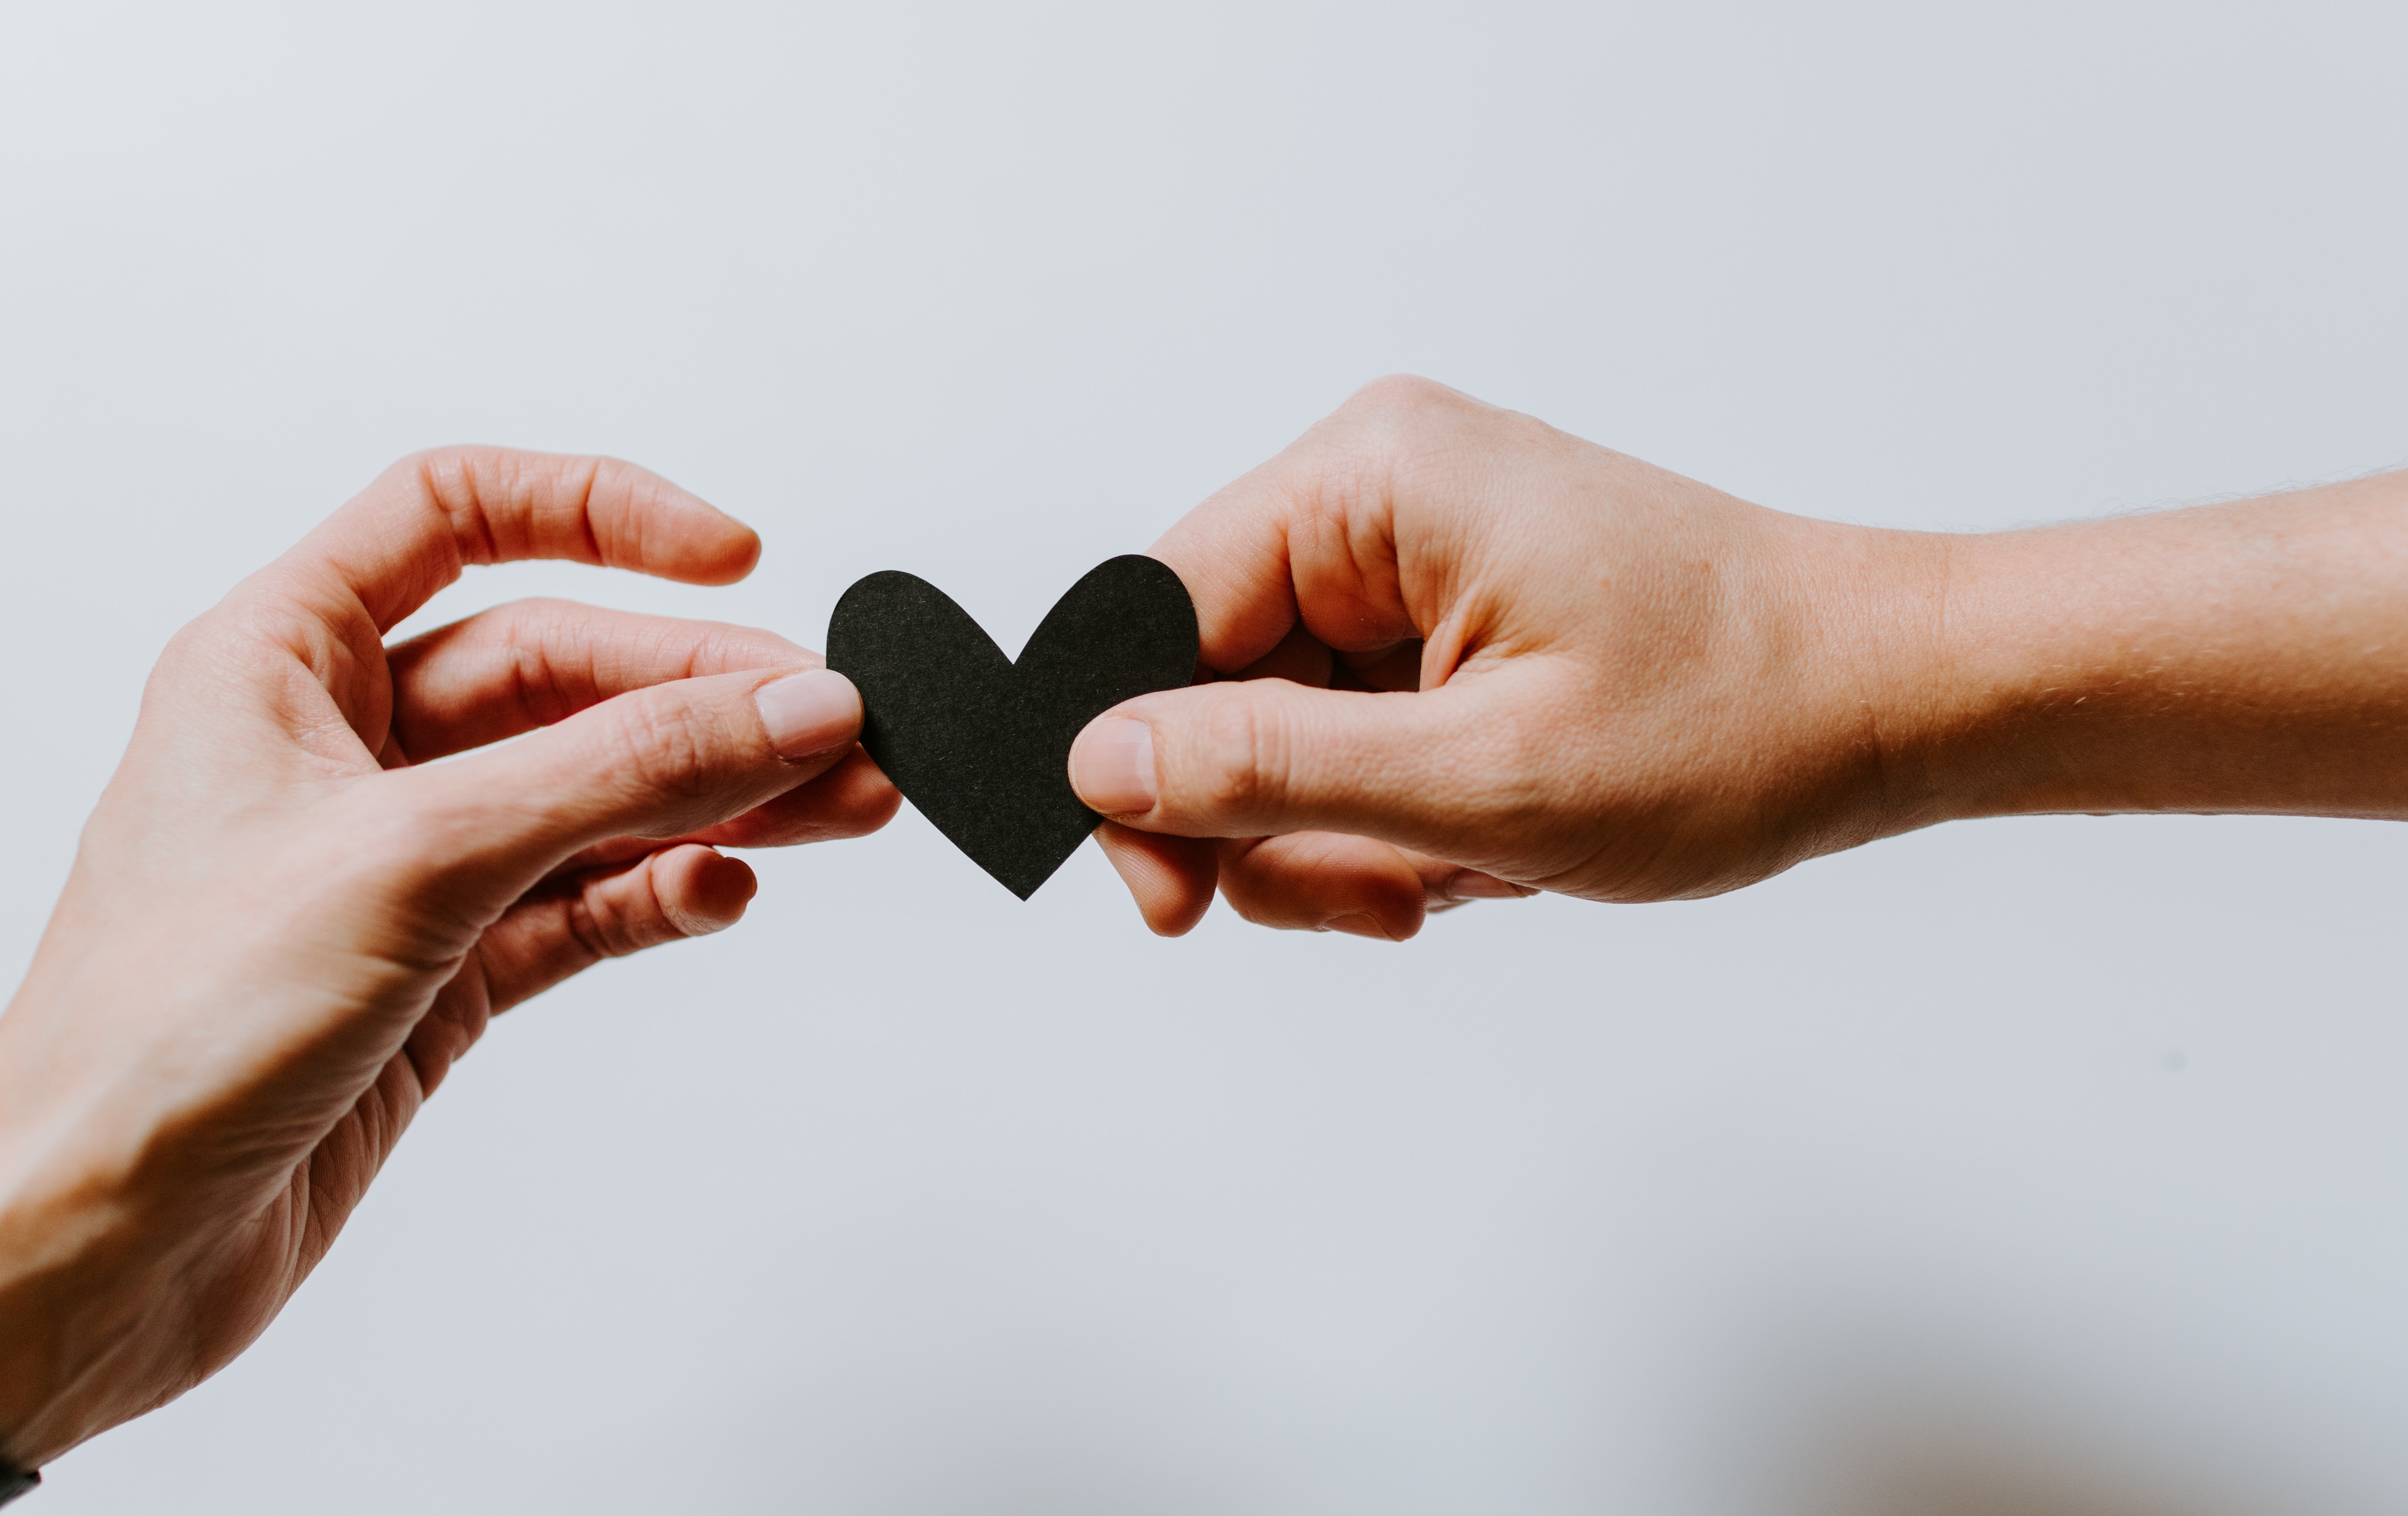 Create an awesome remix! Unsplash (Public Domain) #mothersday #love #heart #hands #hearts #freetoedit